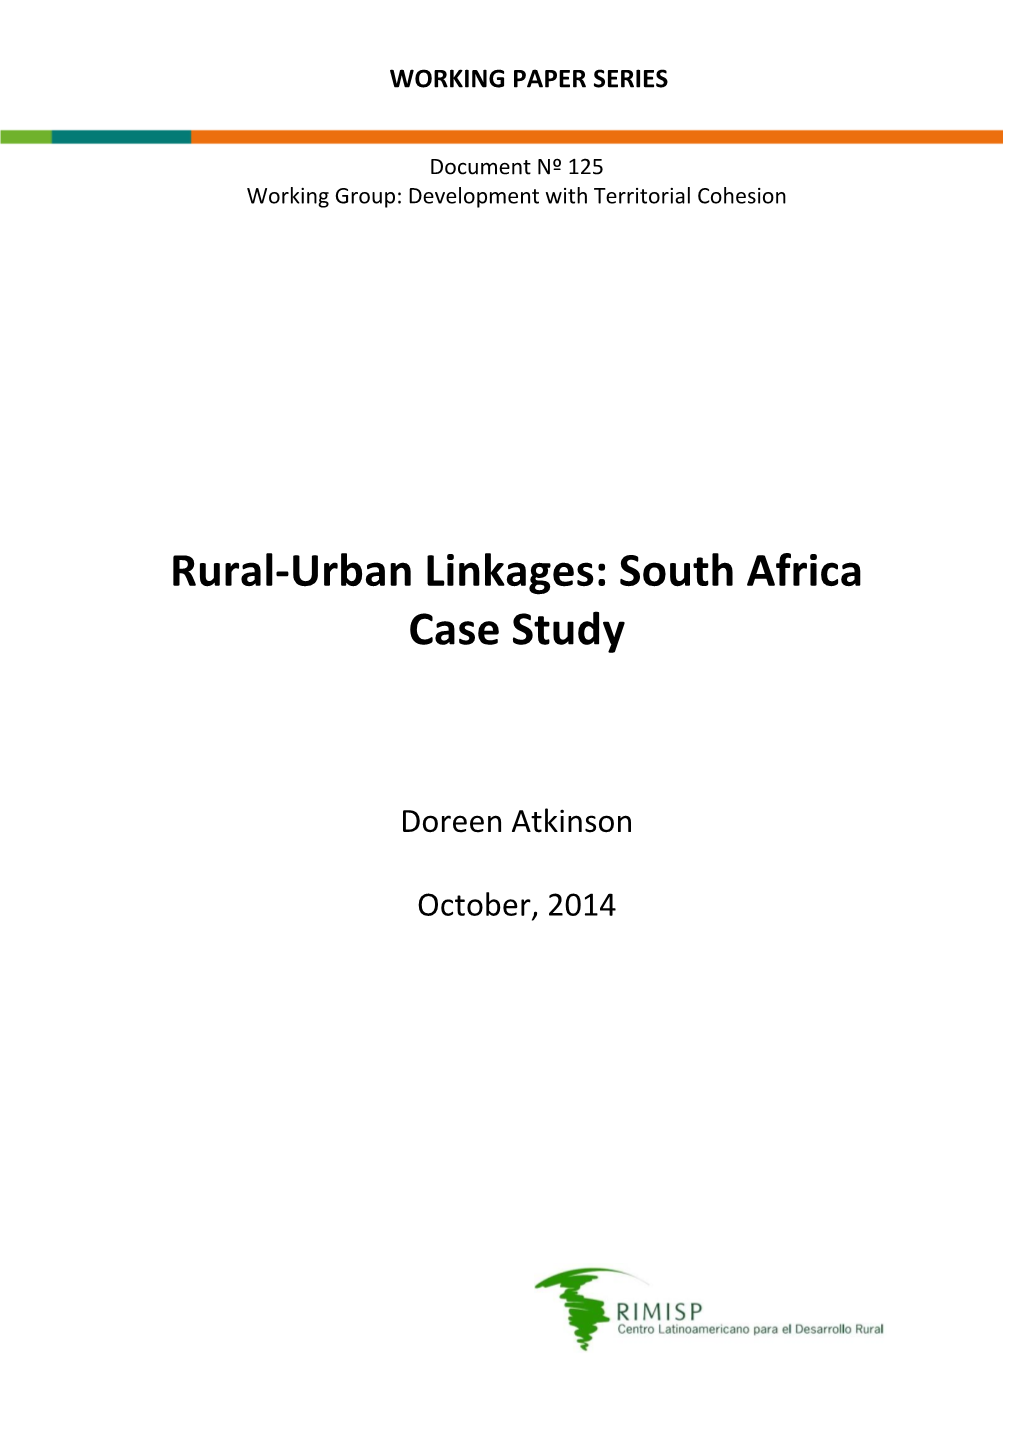 Rural-Urban Linkages: South Africa Case Study